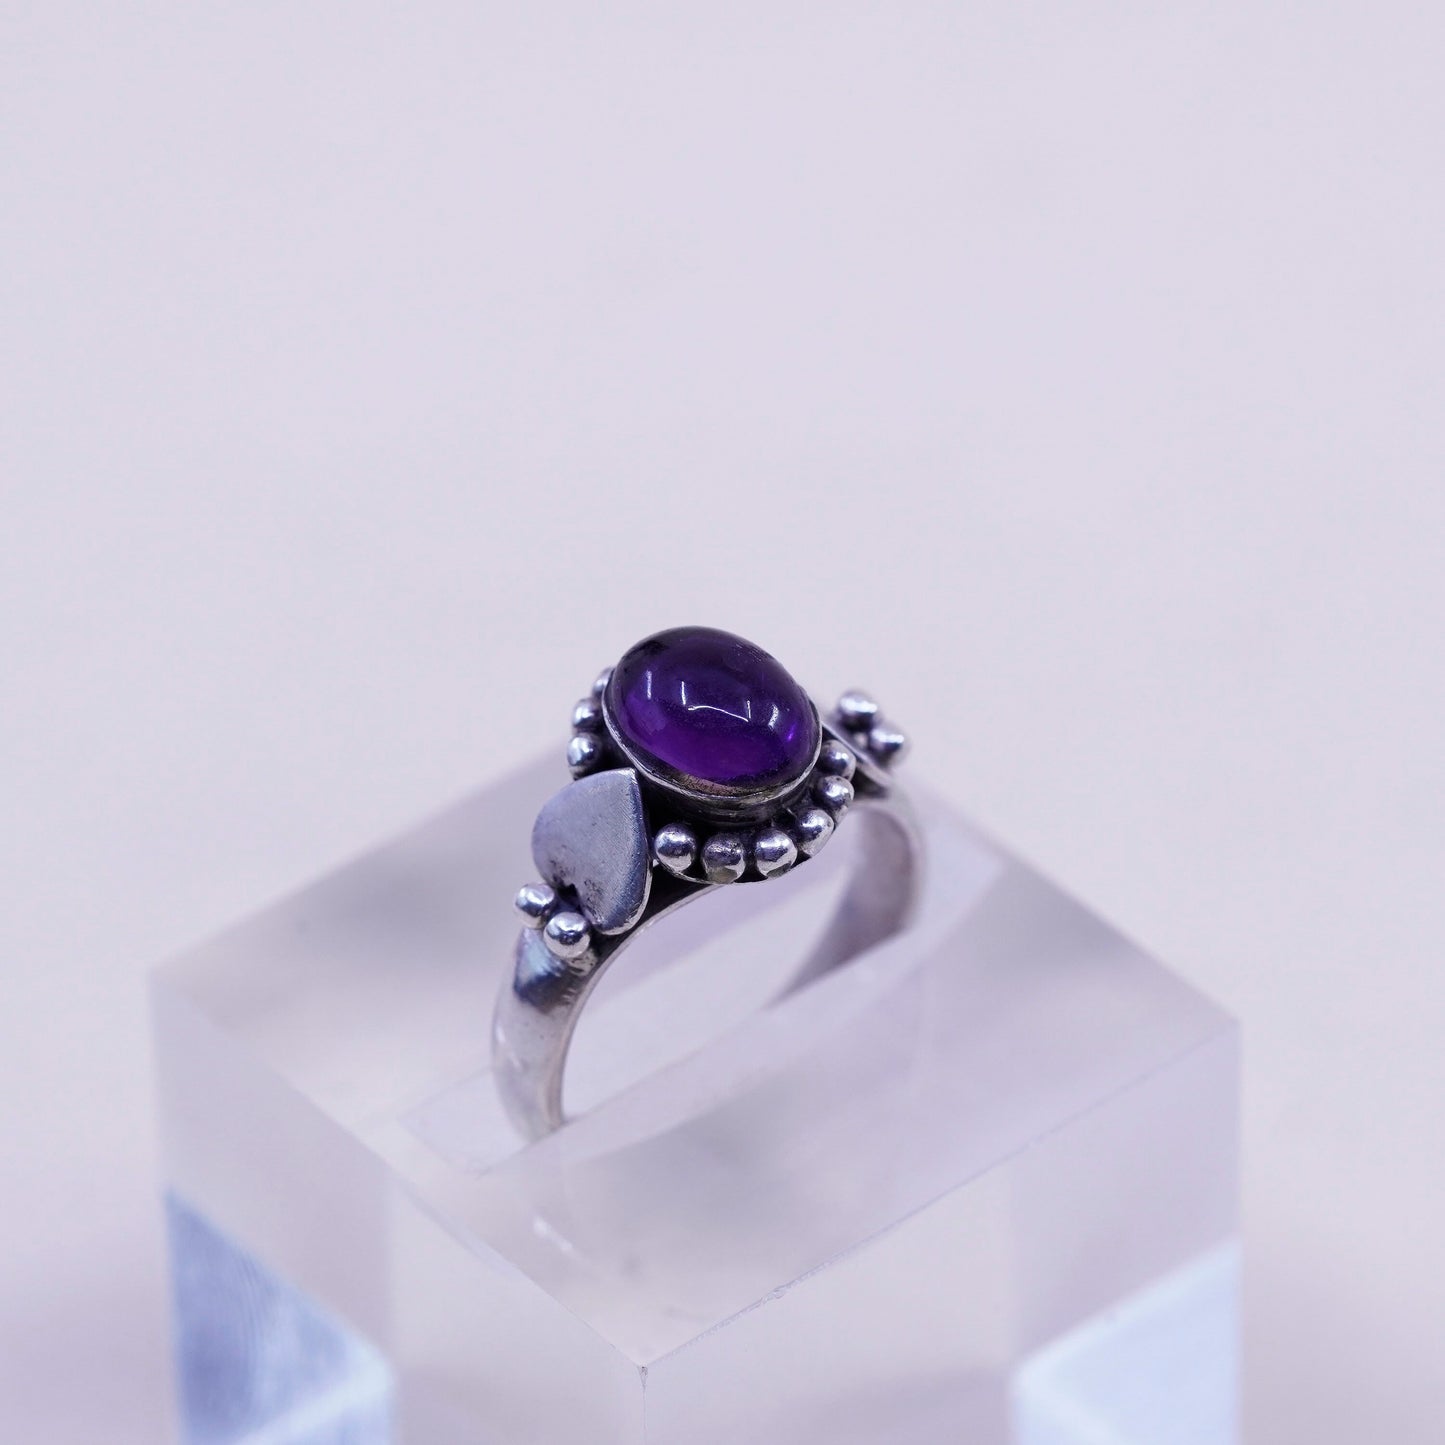 Size 7, Vintage sterling 925 silver handmade ring with amethyst, modernist